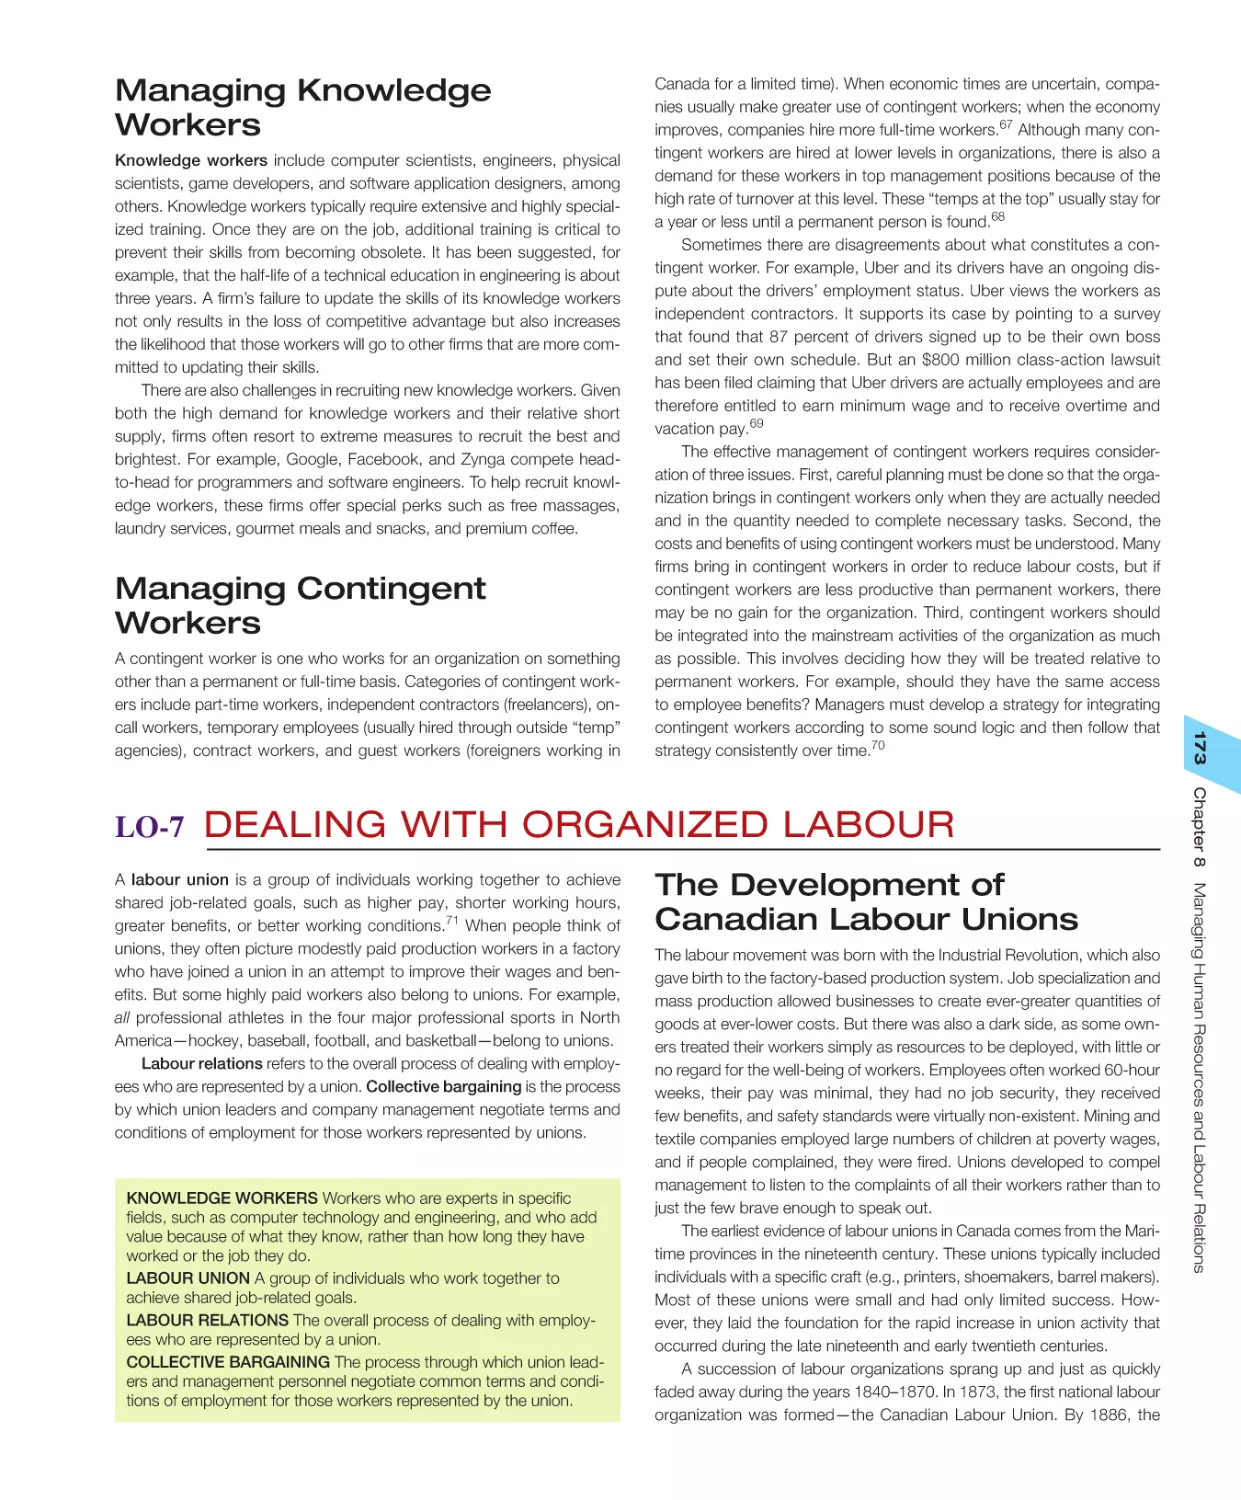 Managing Knowledge Workers
Managing Contingent Workers
LO‐7 Dealing with Organized Labour